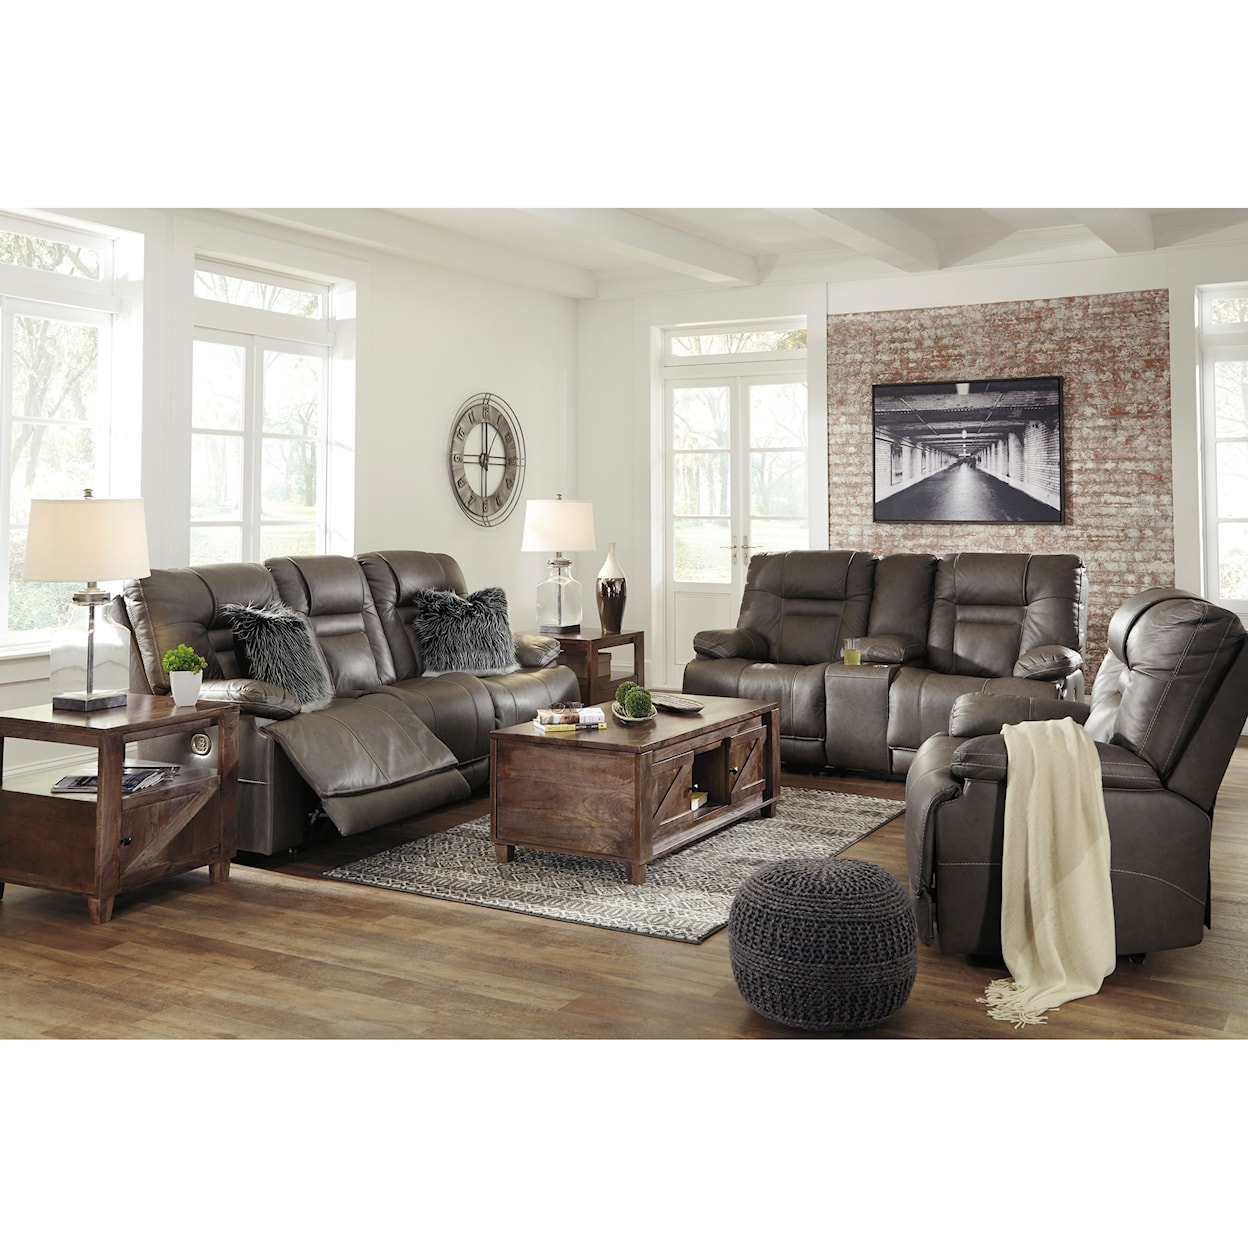 Signature Design by Ashley Wurstrow Reclining Living Room Group